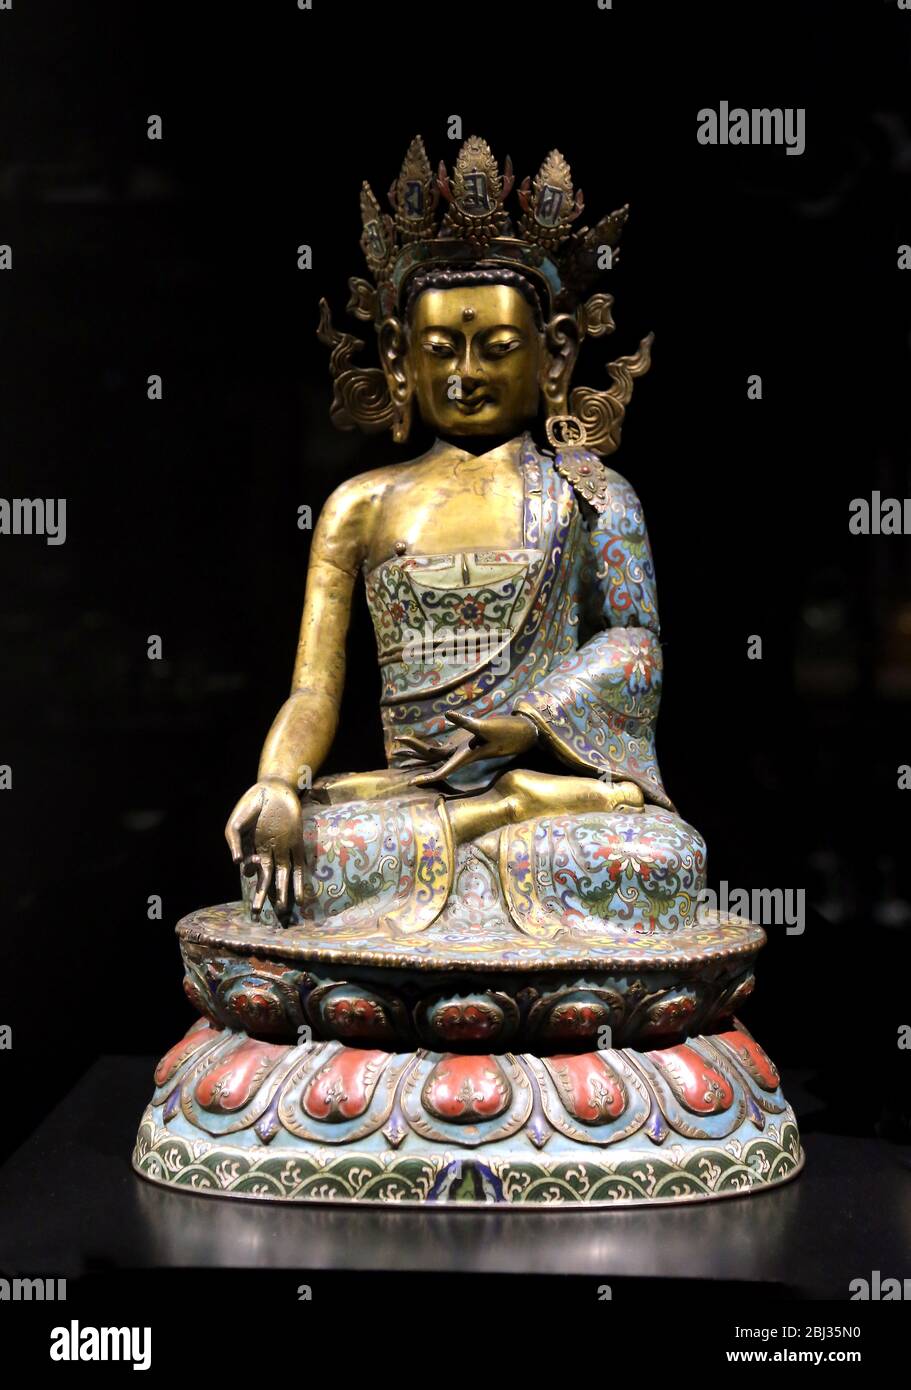 Bhudda statue, after the sino-tibetan style. Qialong Period, (1736-1796) 18 th. century. Copper and enamel. Museu do Oriente, Lisbon, Portugal Stock Photo